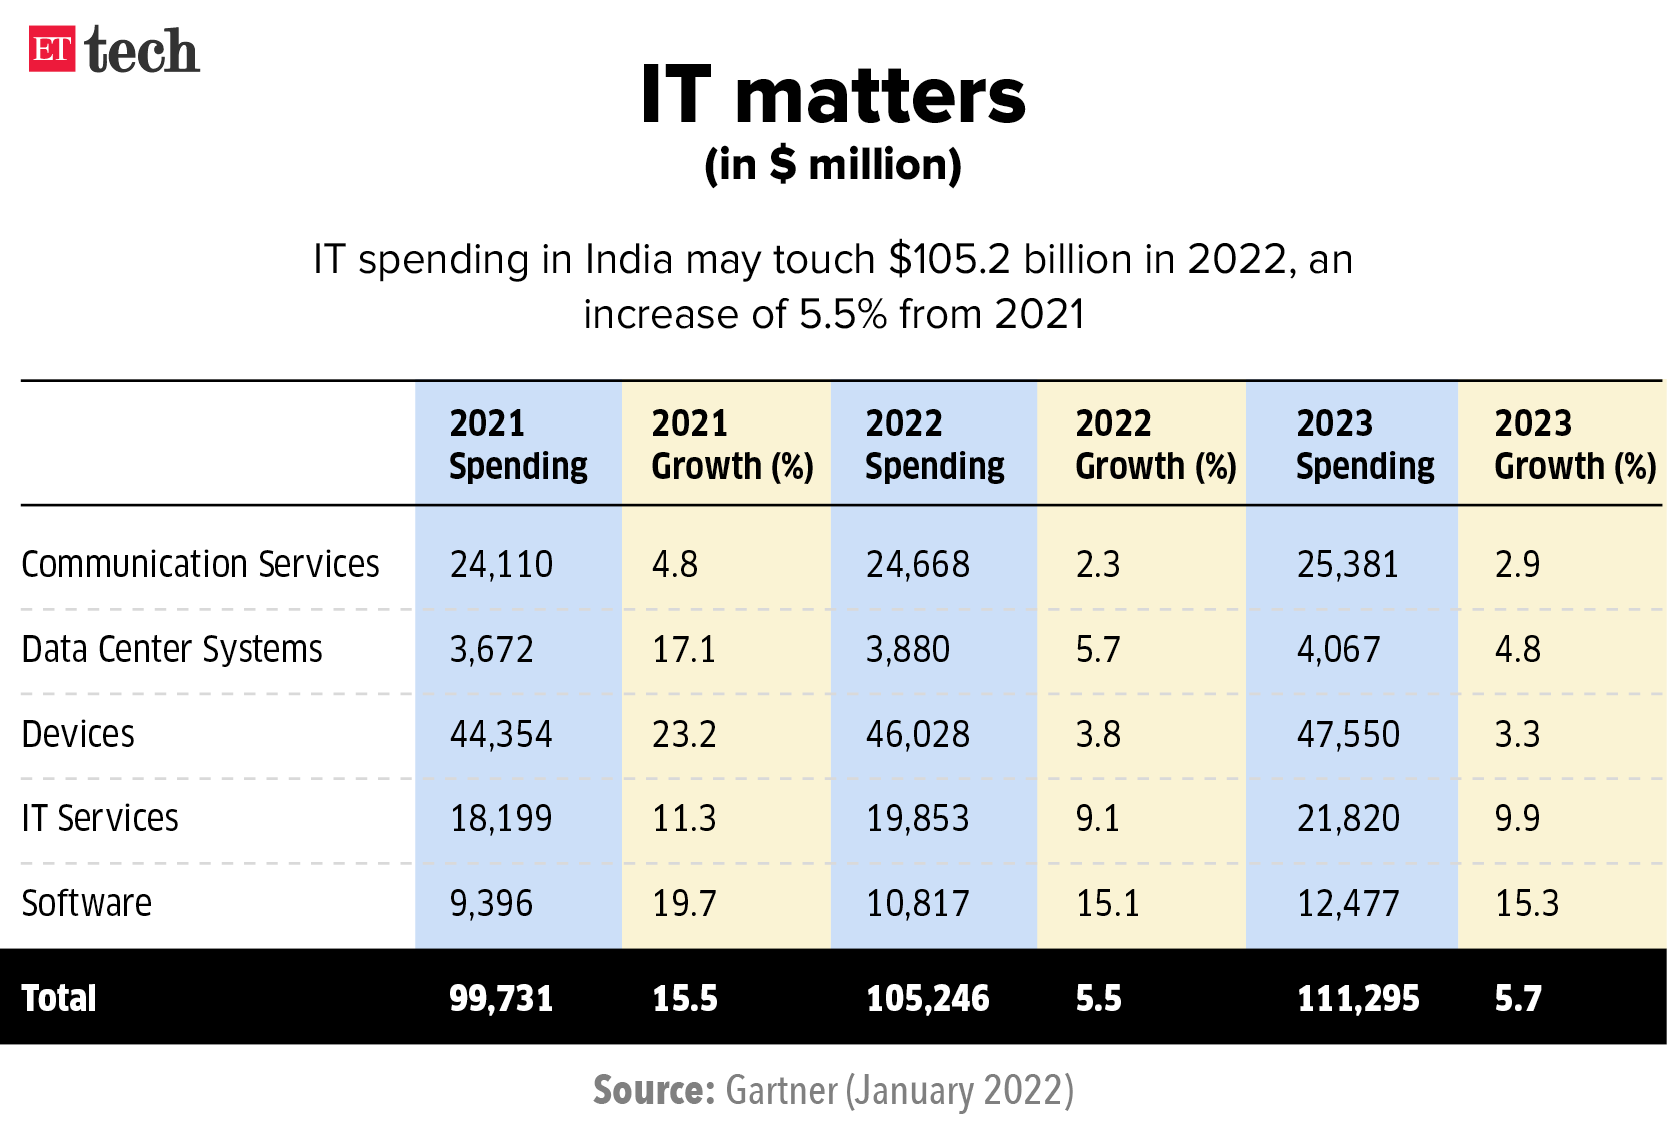 indian it sector India firms to spend 105.2 billion on IT in 2022